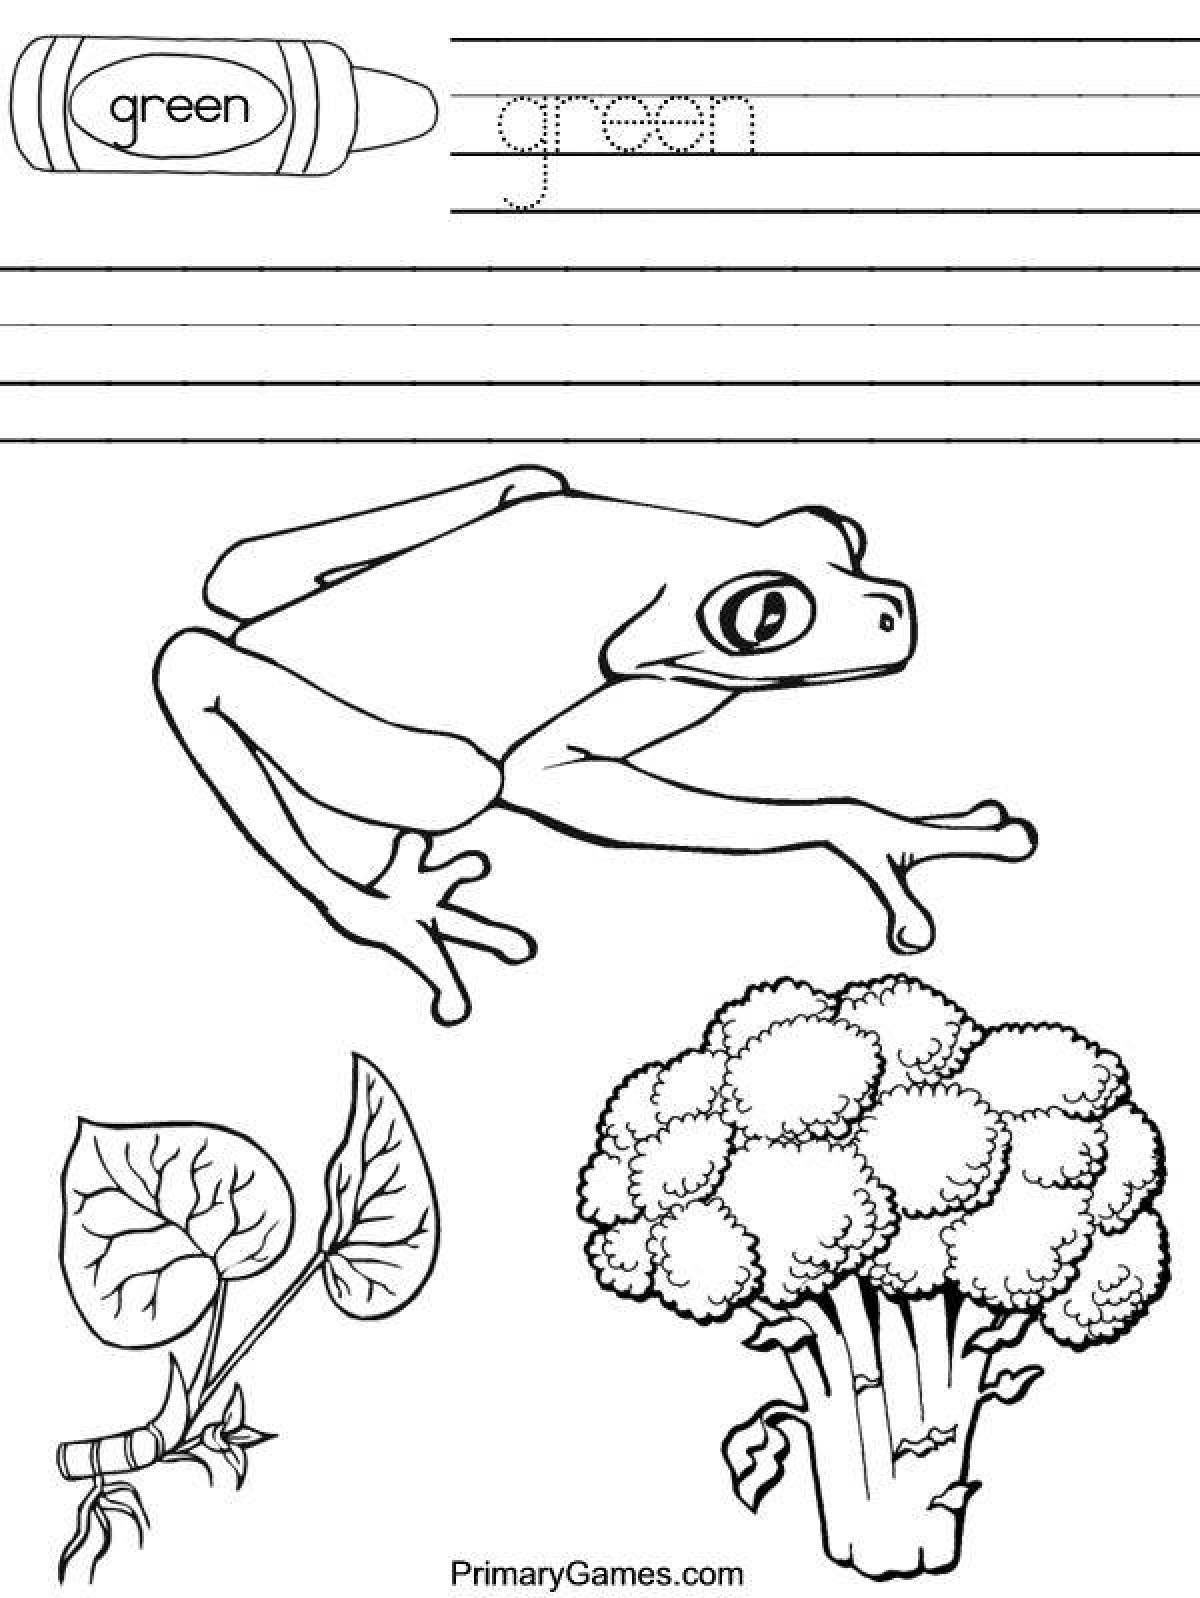 Excited Green Friend Coloring Page